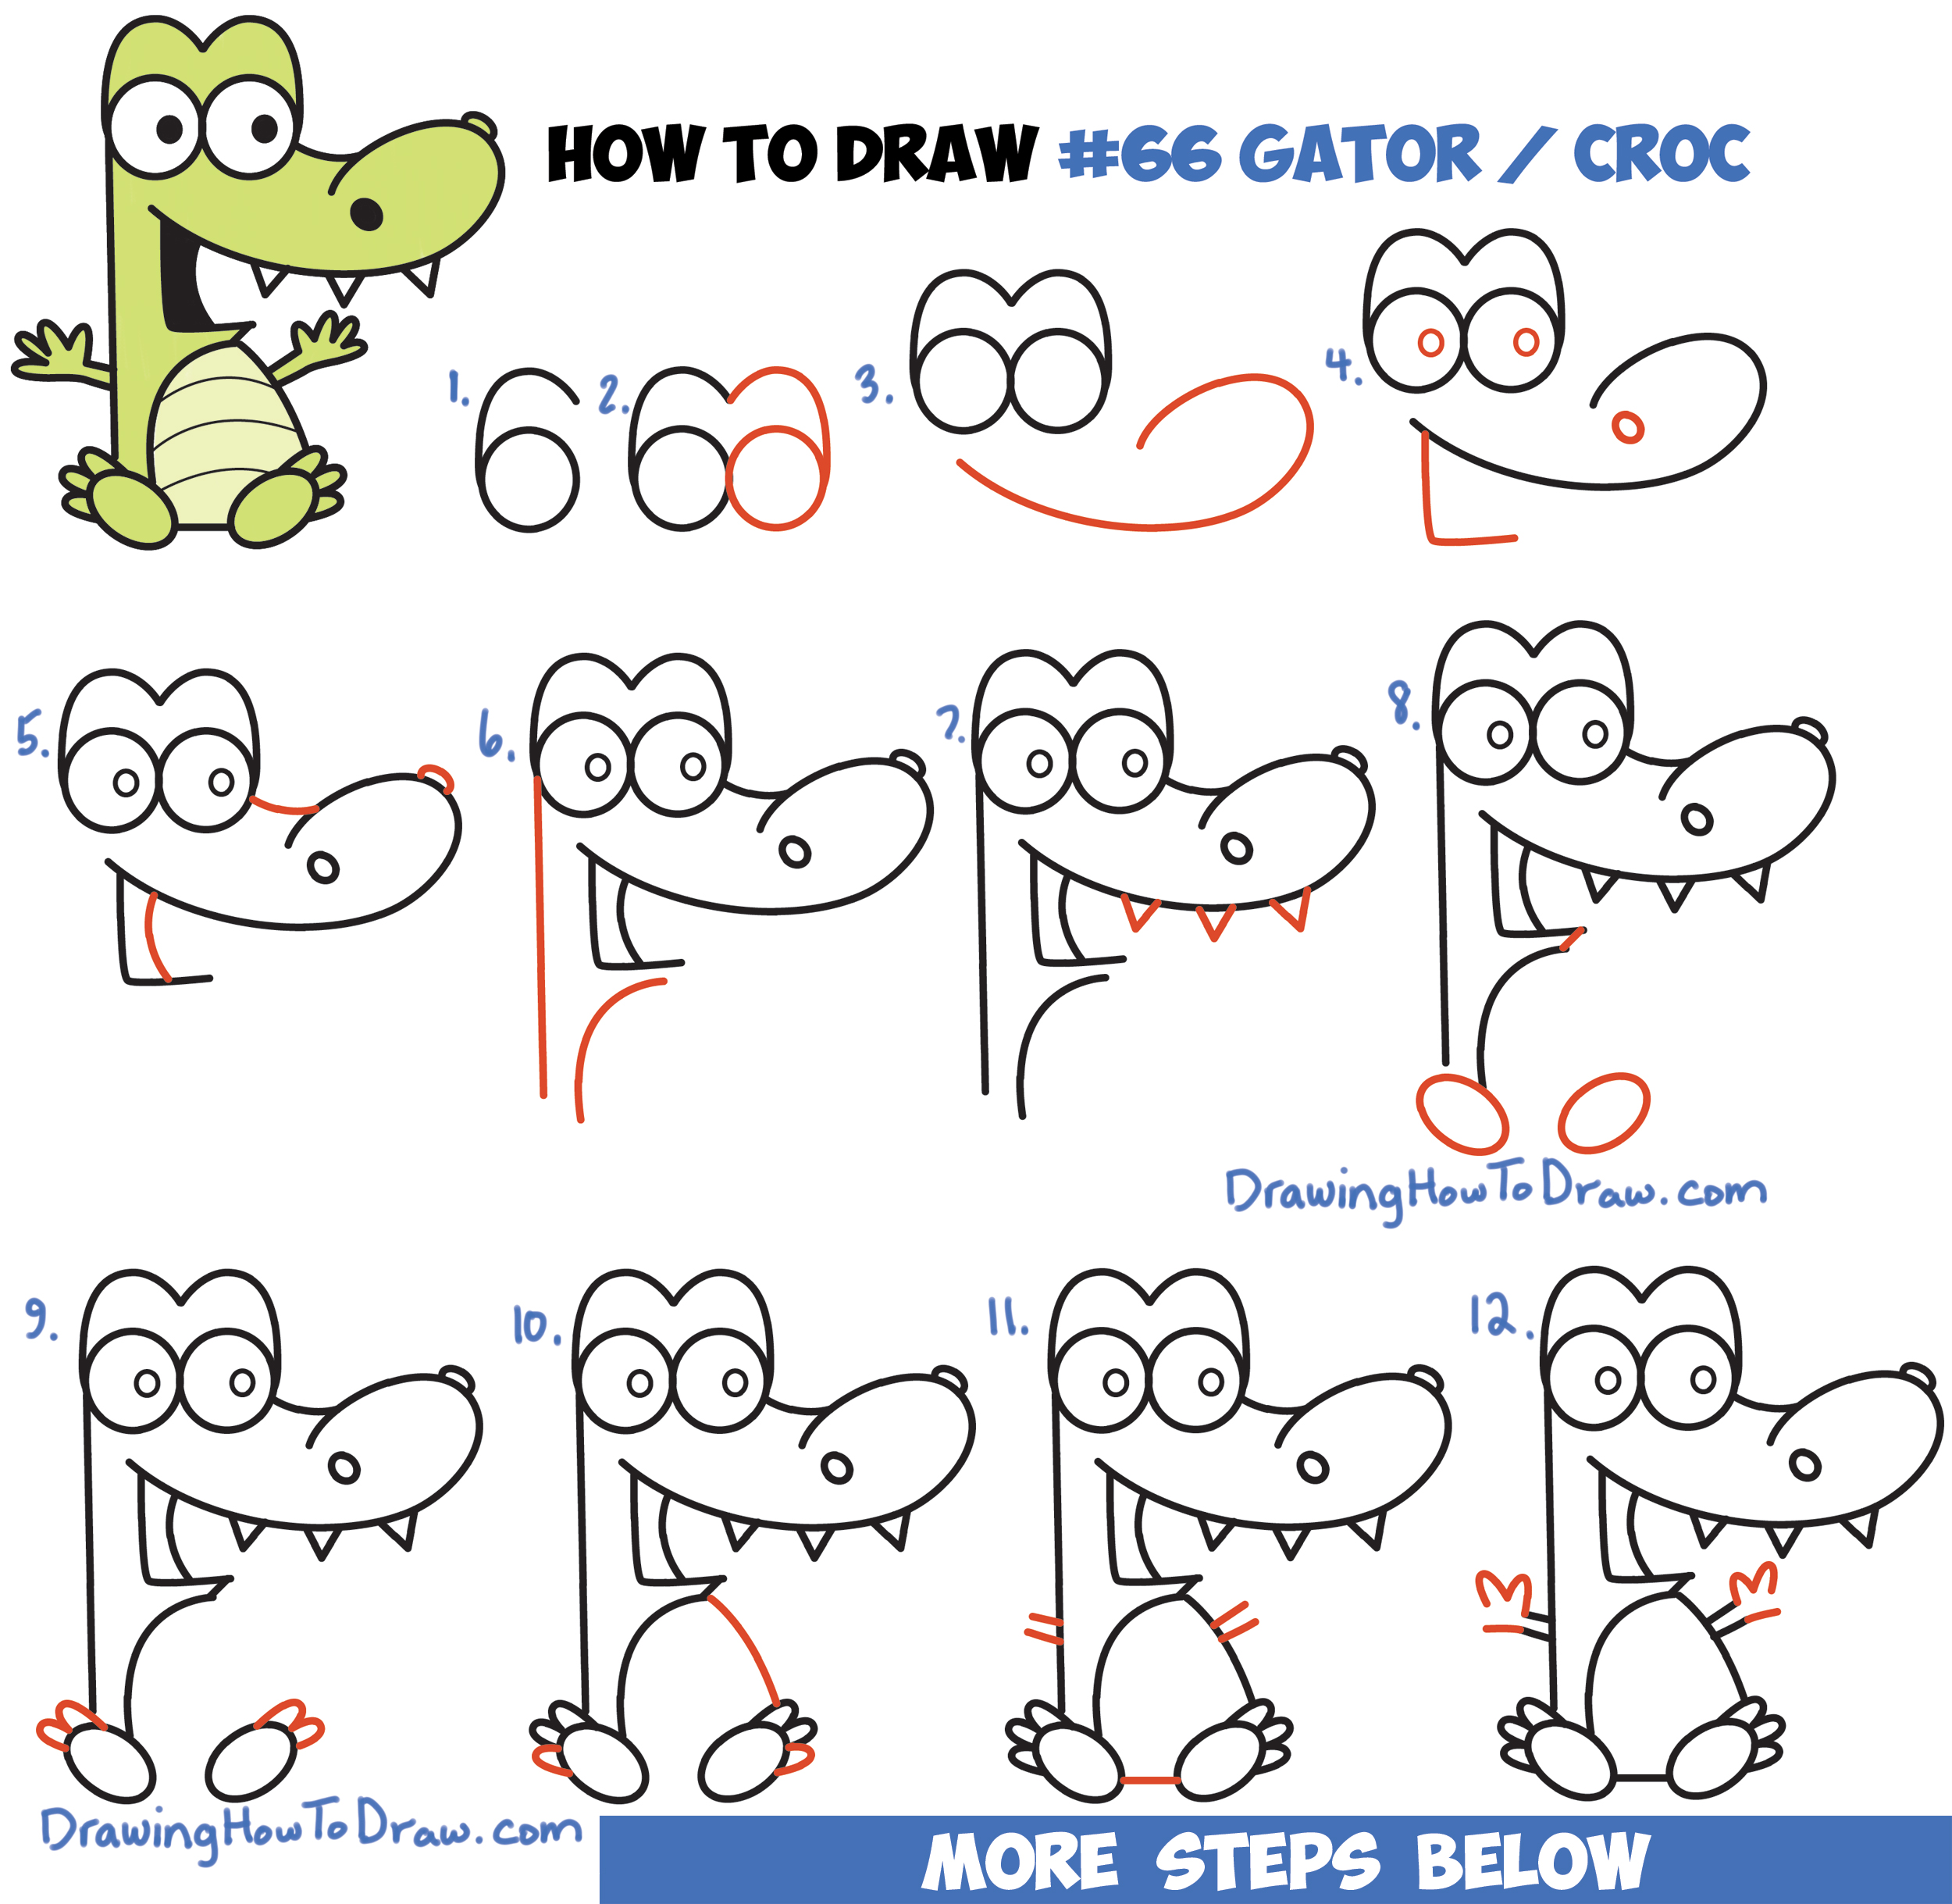 How to Draw Cartoon Crocodile or Alligator from Numbers Easy Step by Step  Drawing Tutorial for Kids - How to Draw Step by Step Drawing Tutorials